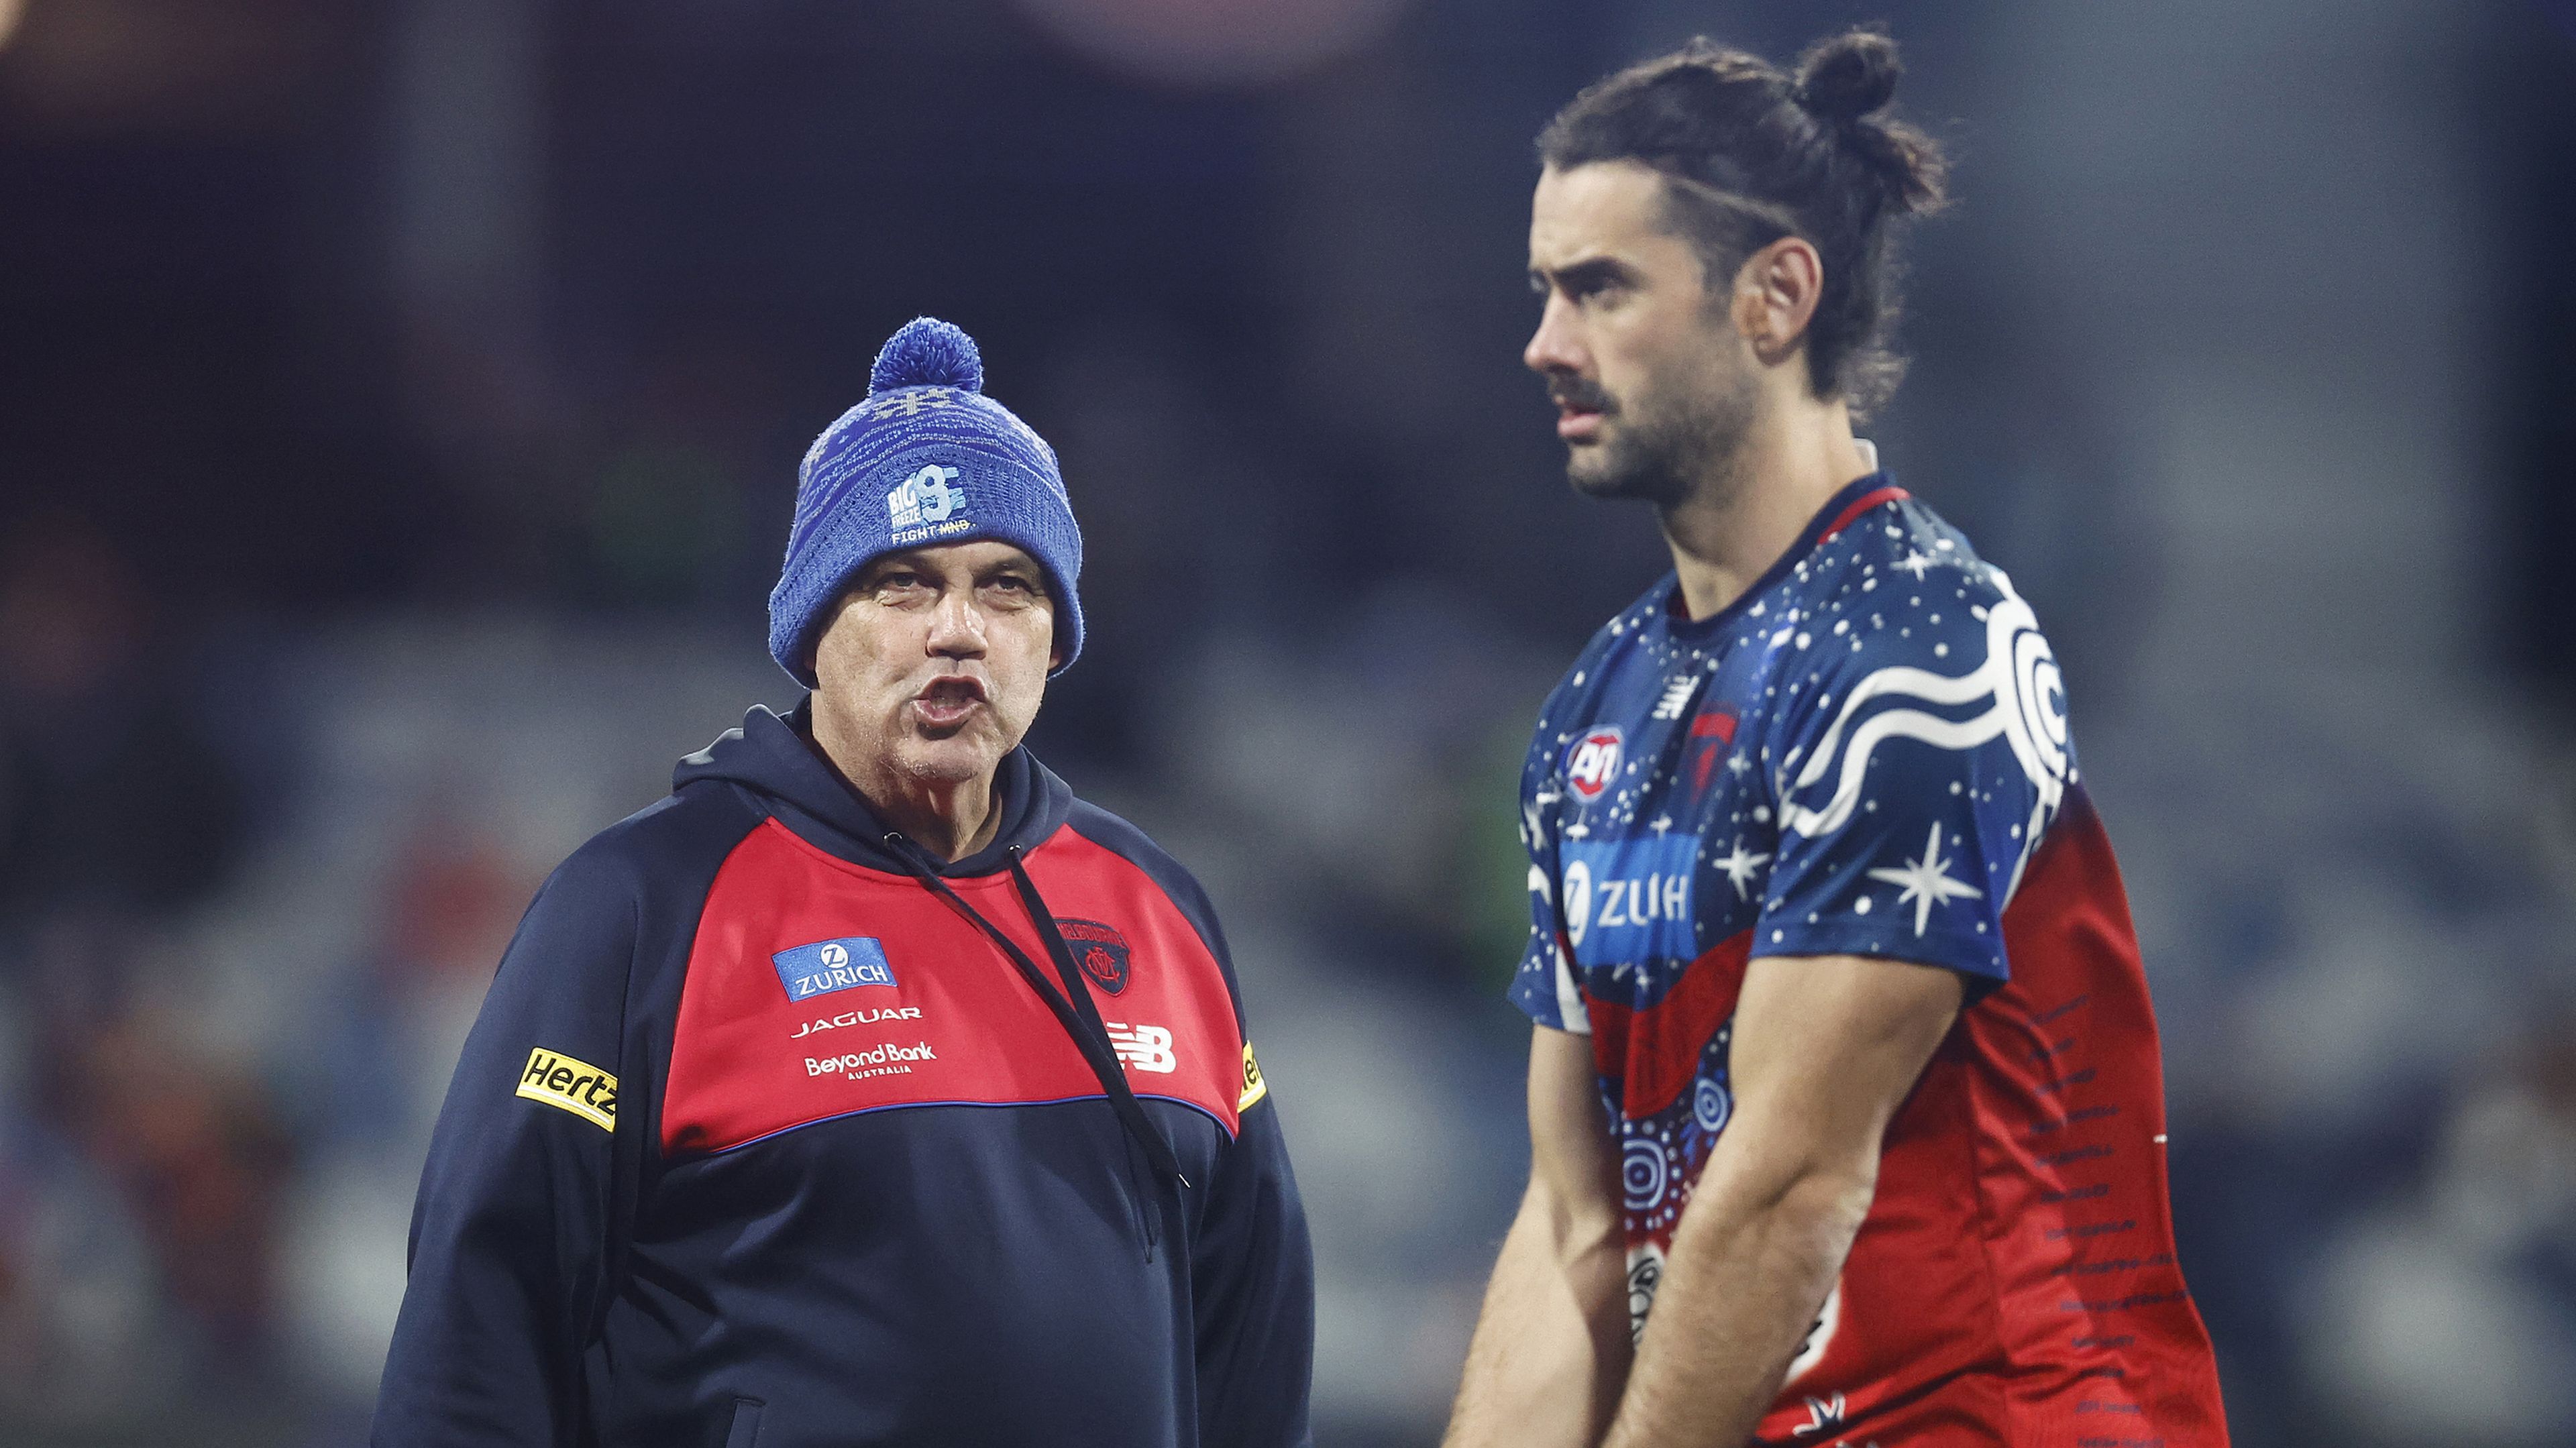 GEELONG, AUSTRALIA - JUNE 22: Demons assistant coach Mark Williams speaks with Brodie Grundy of the Demons before the round 15 AFL match between Geelong Cats and Melbourne Demons at GMHBA Stadium, on June 22, 2023, in Geelong, Australia. (Photo by Daniel Pockett/Getty Images)